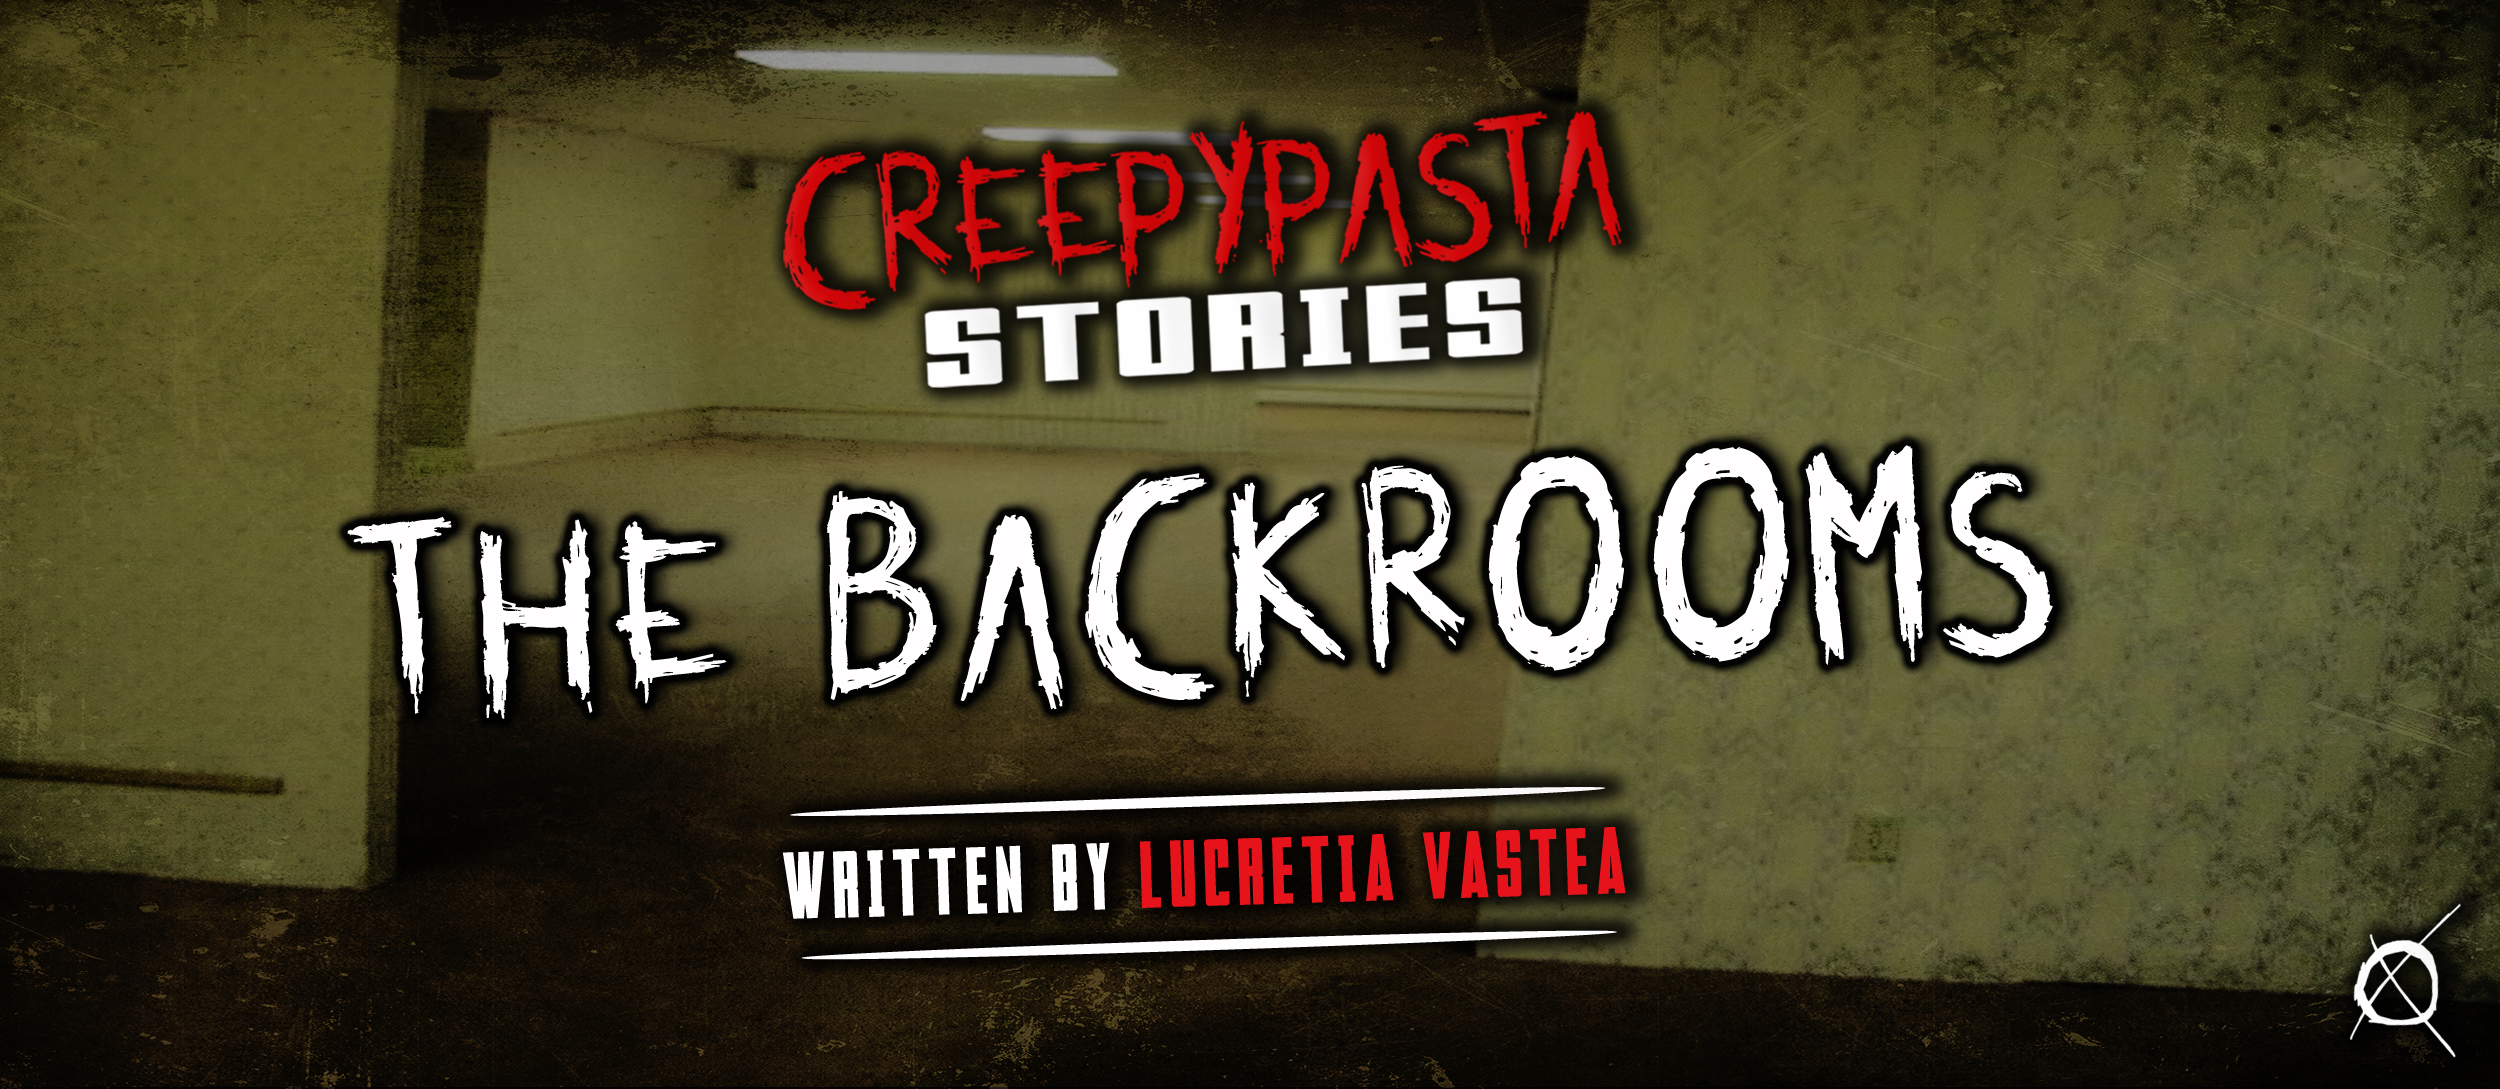 Horror Series The Backrooms Is Getting Turned Into a